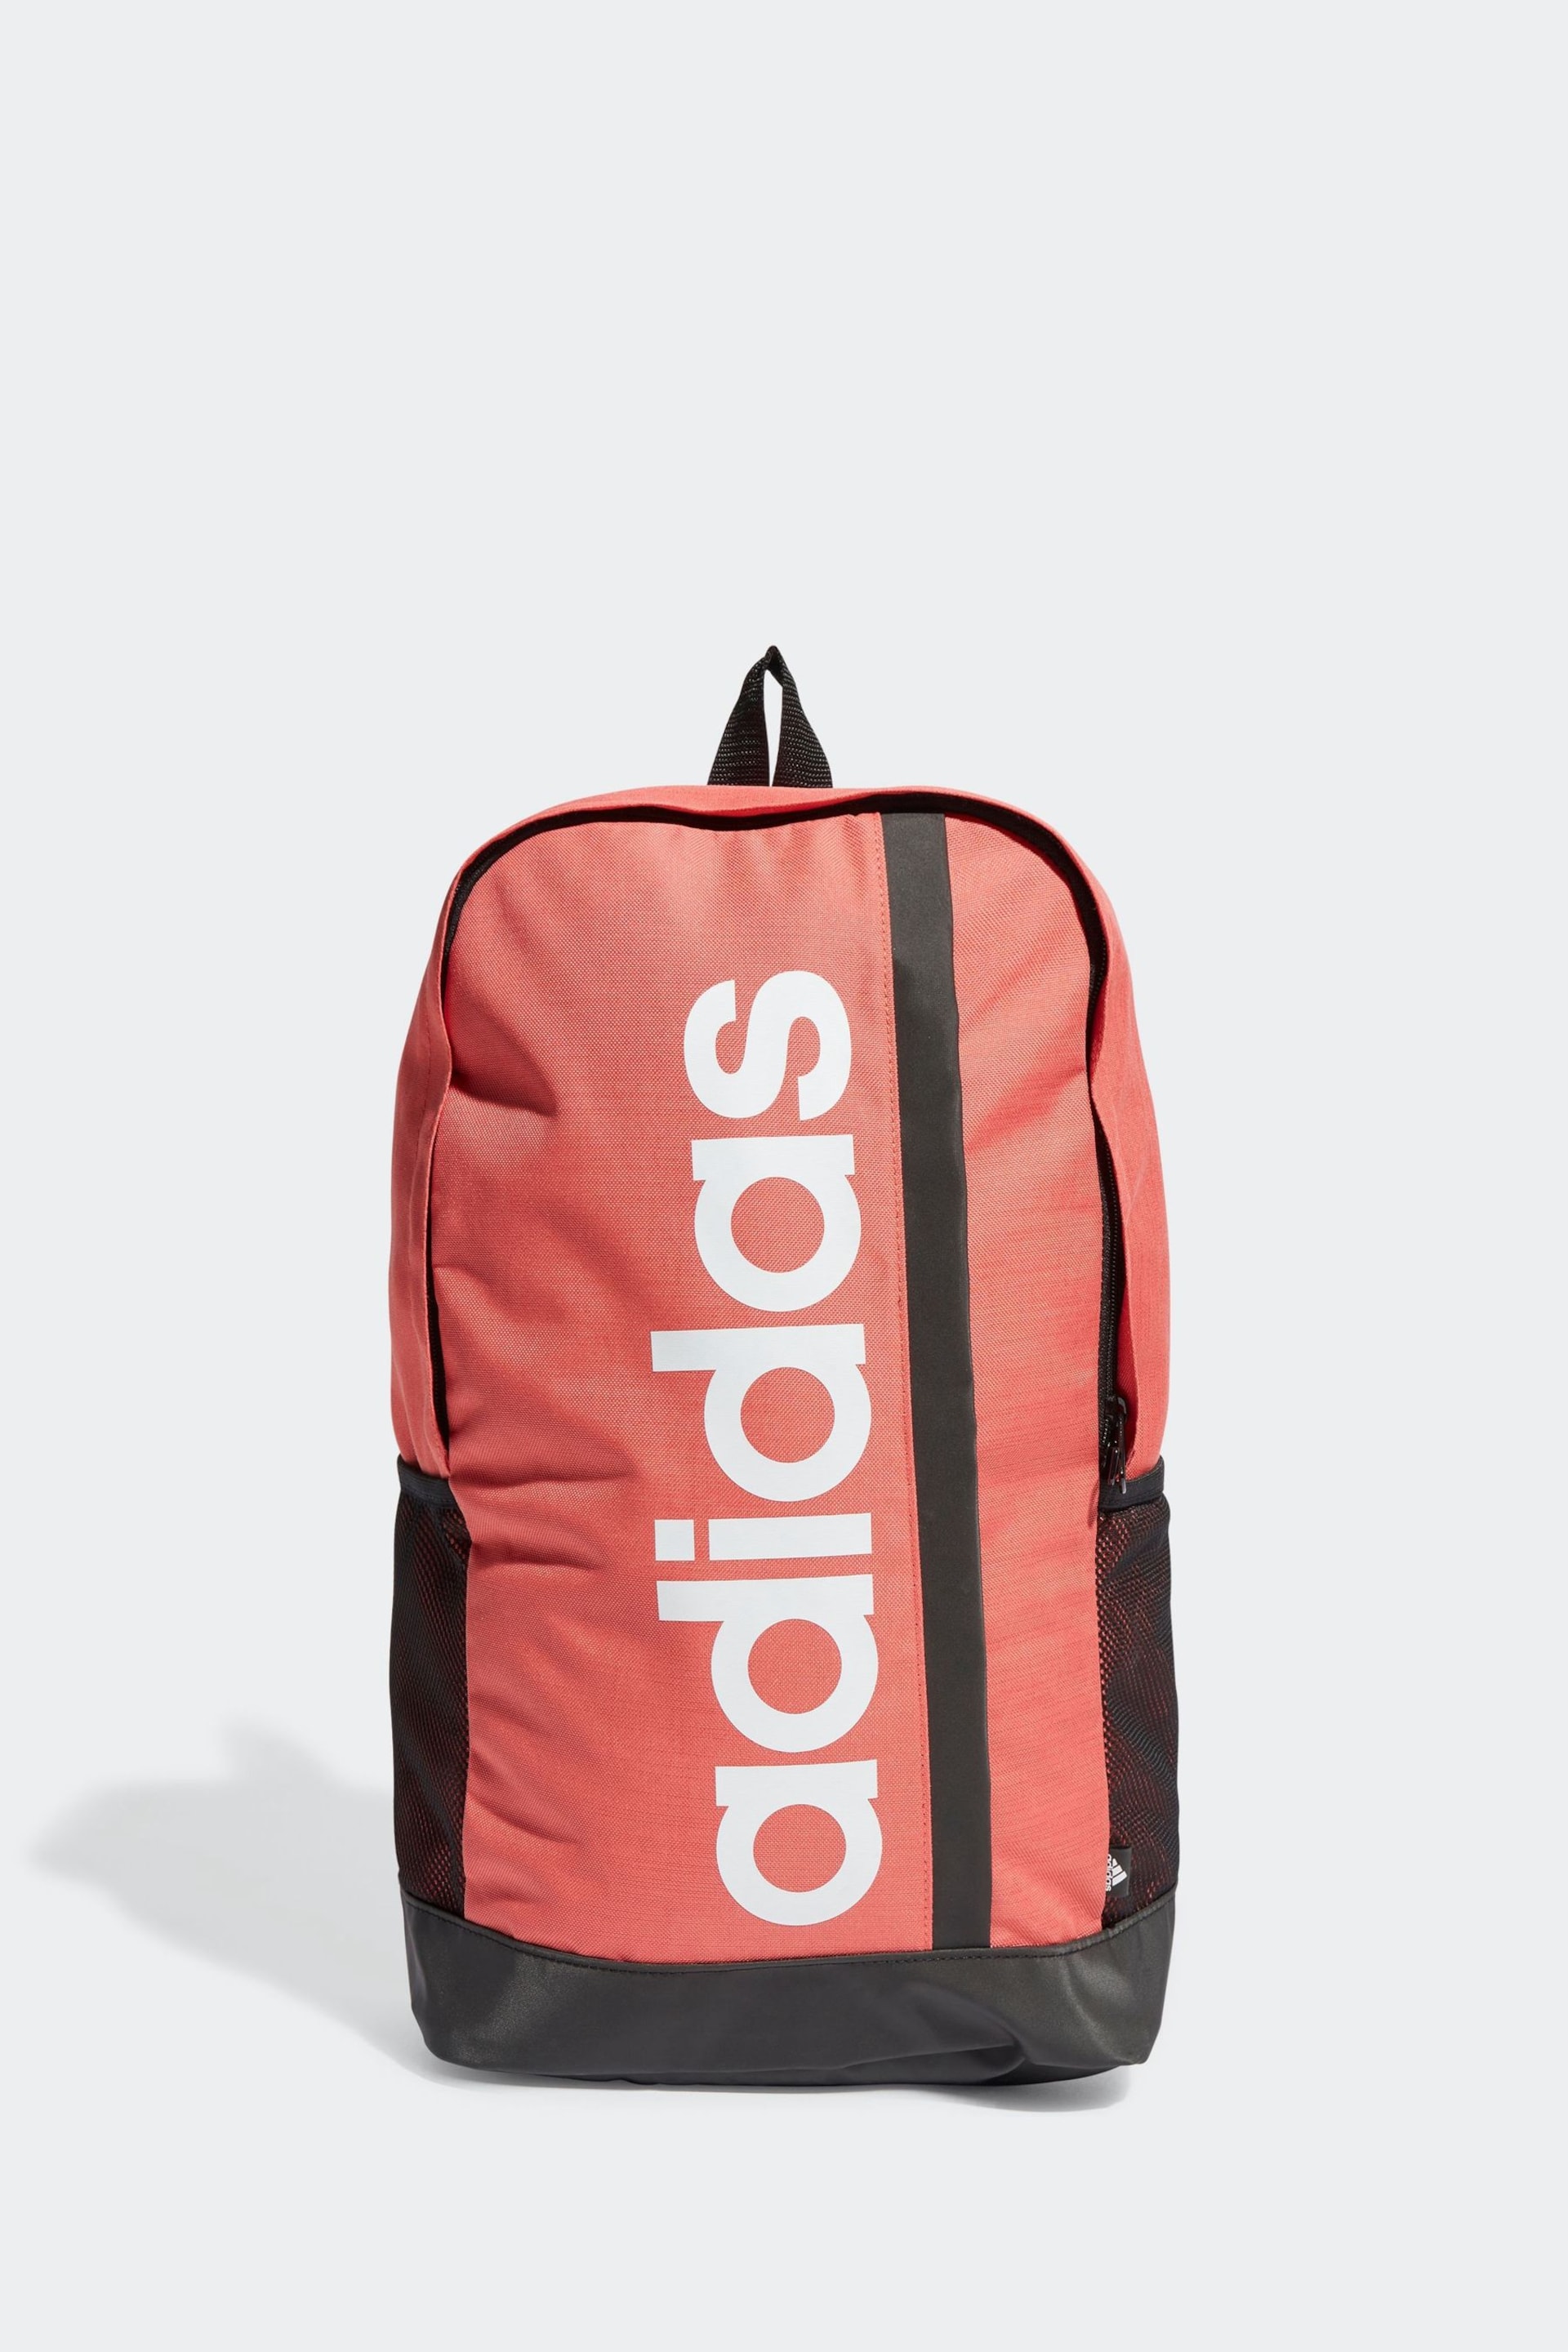 adidas Red Essentials Linear Backpack - Image 3 of 5